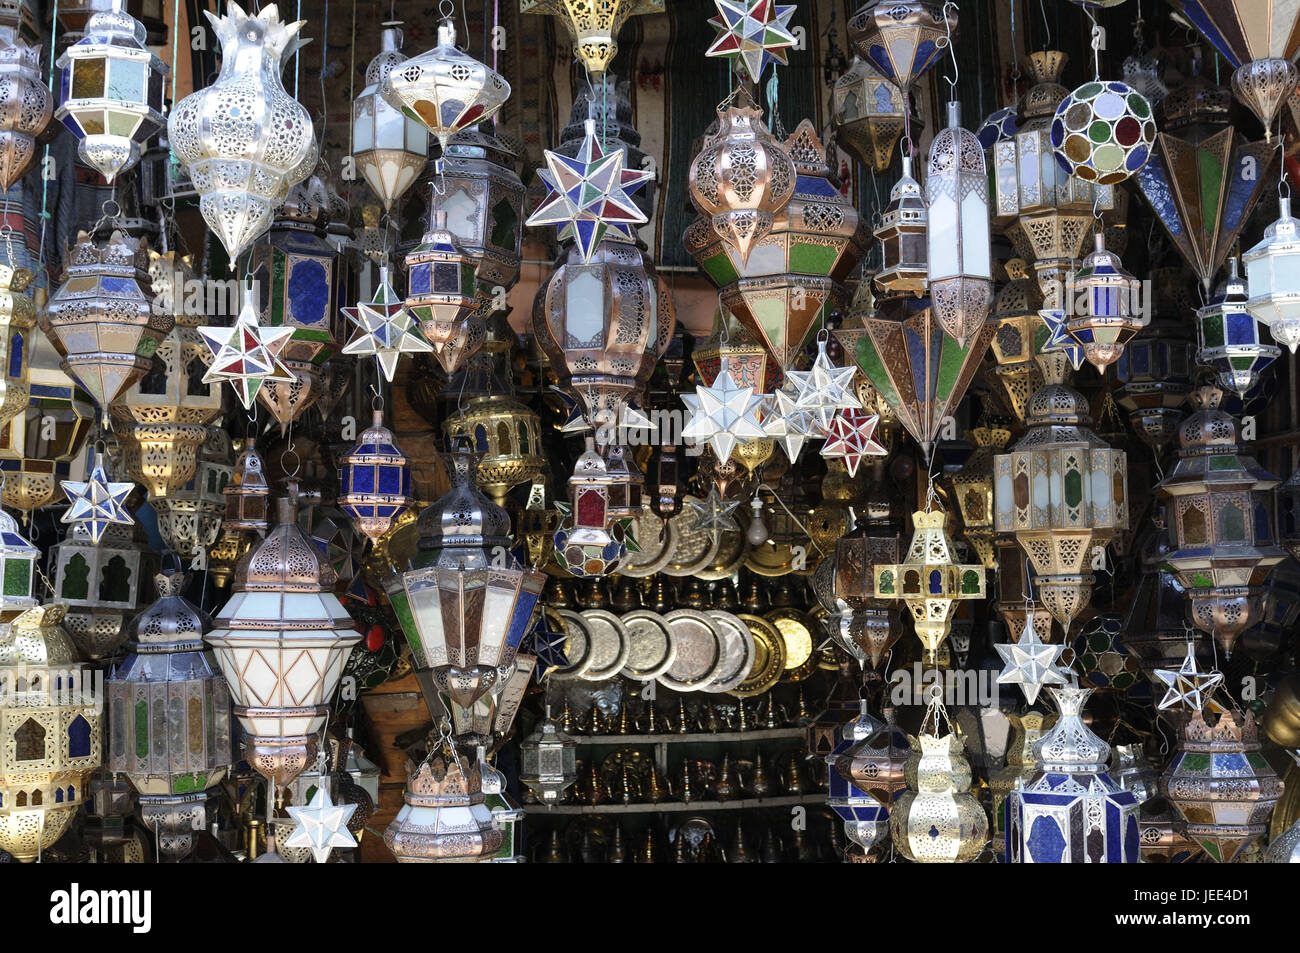 Lamps, traditionally, market stall, Marrakech, Morocco, Africa, Stock Photo